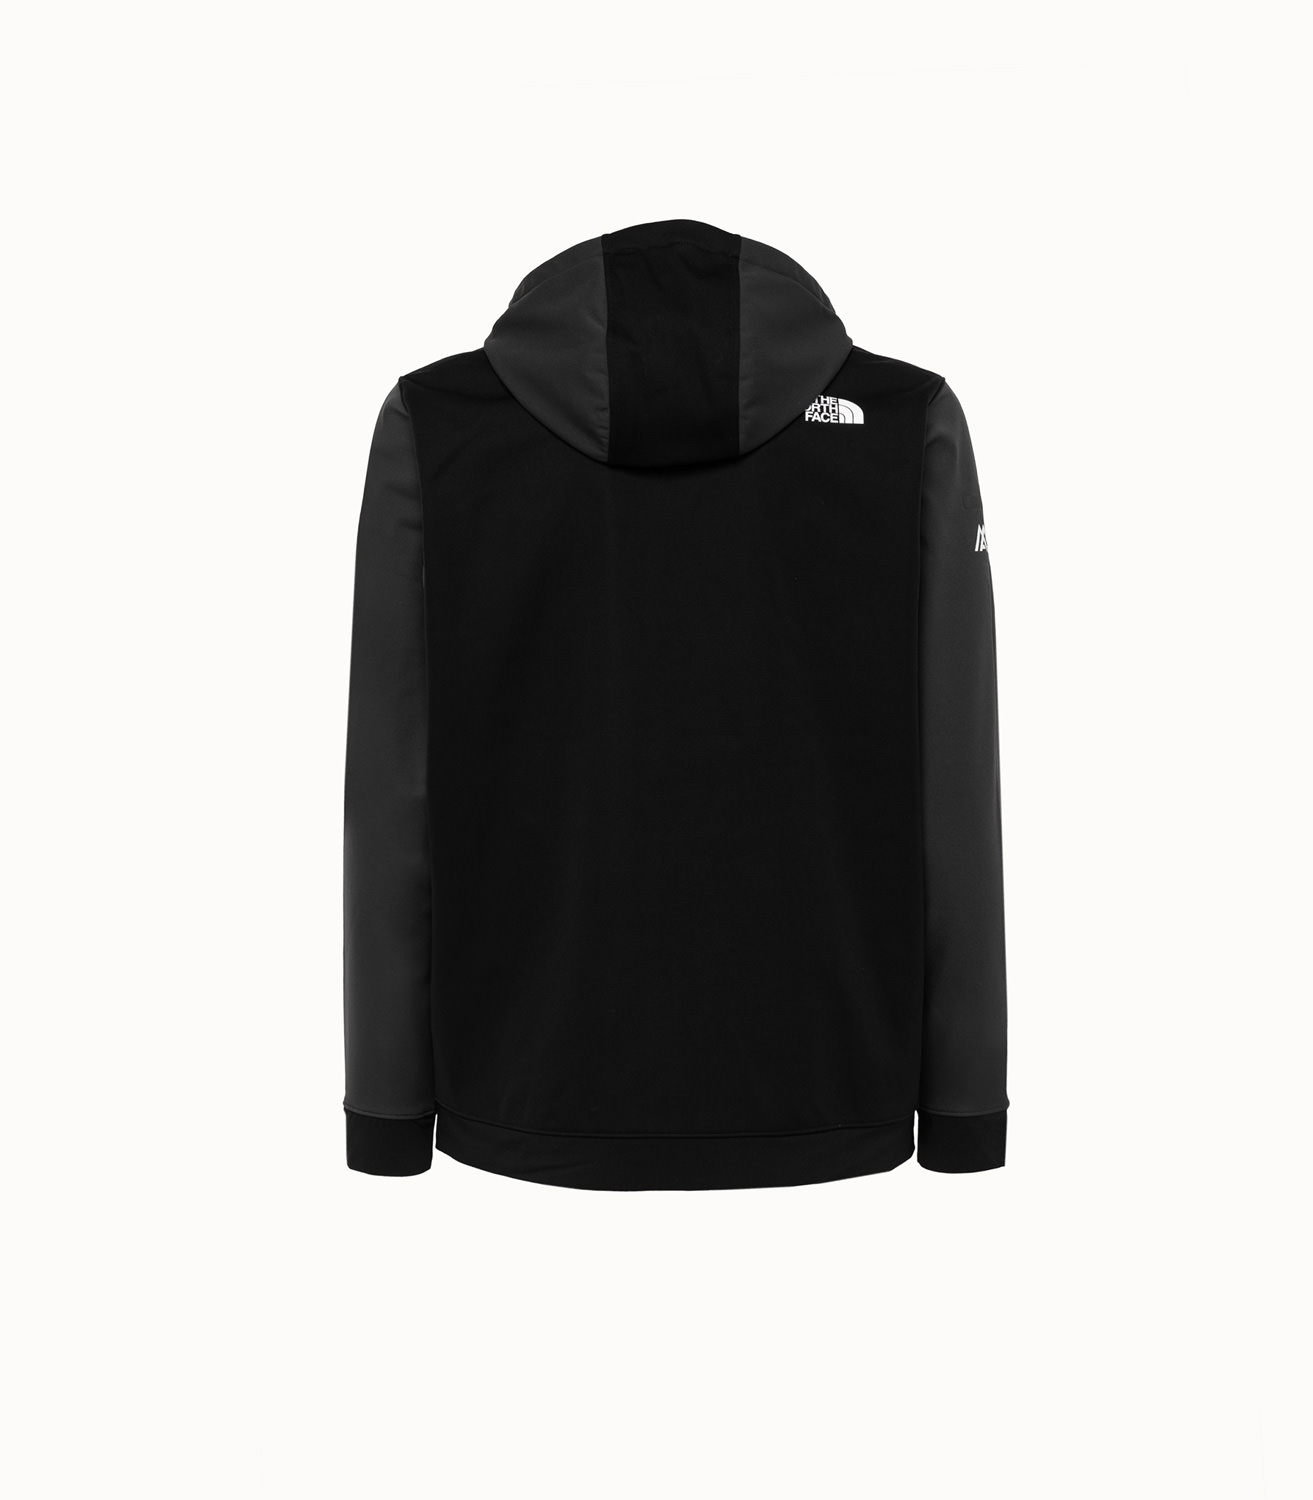 THE NORTH FACE SOFTSHELL JACKET IN WATER RESISTANT FABRIC